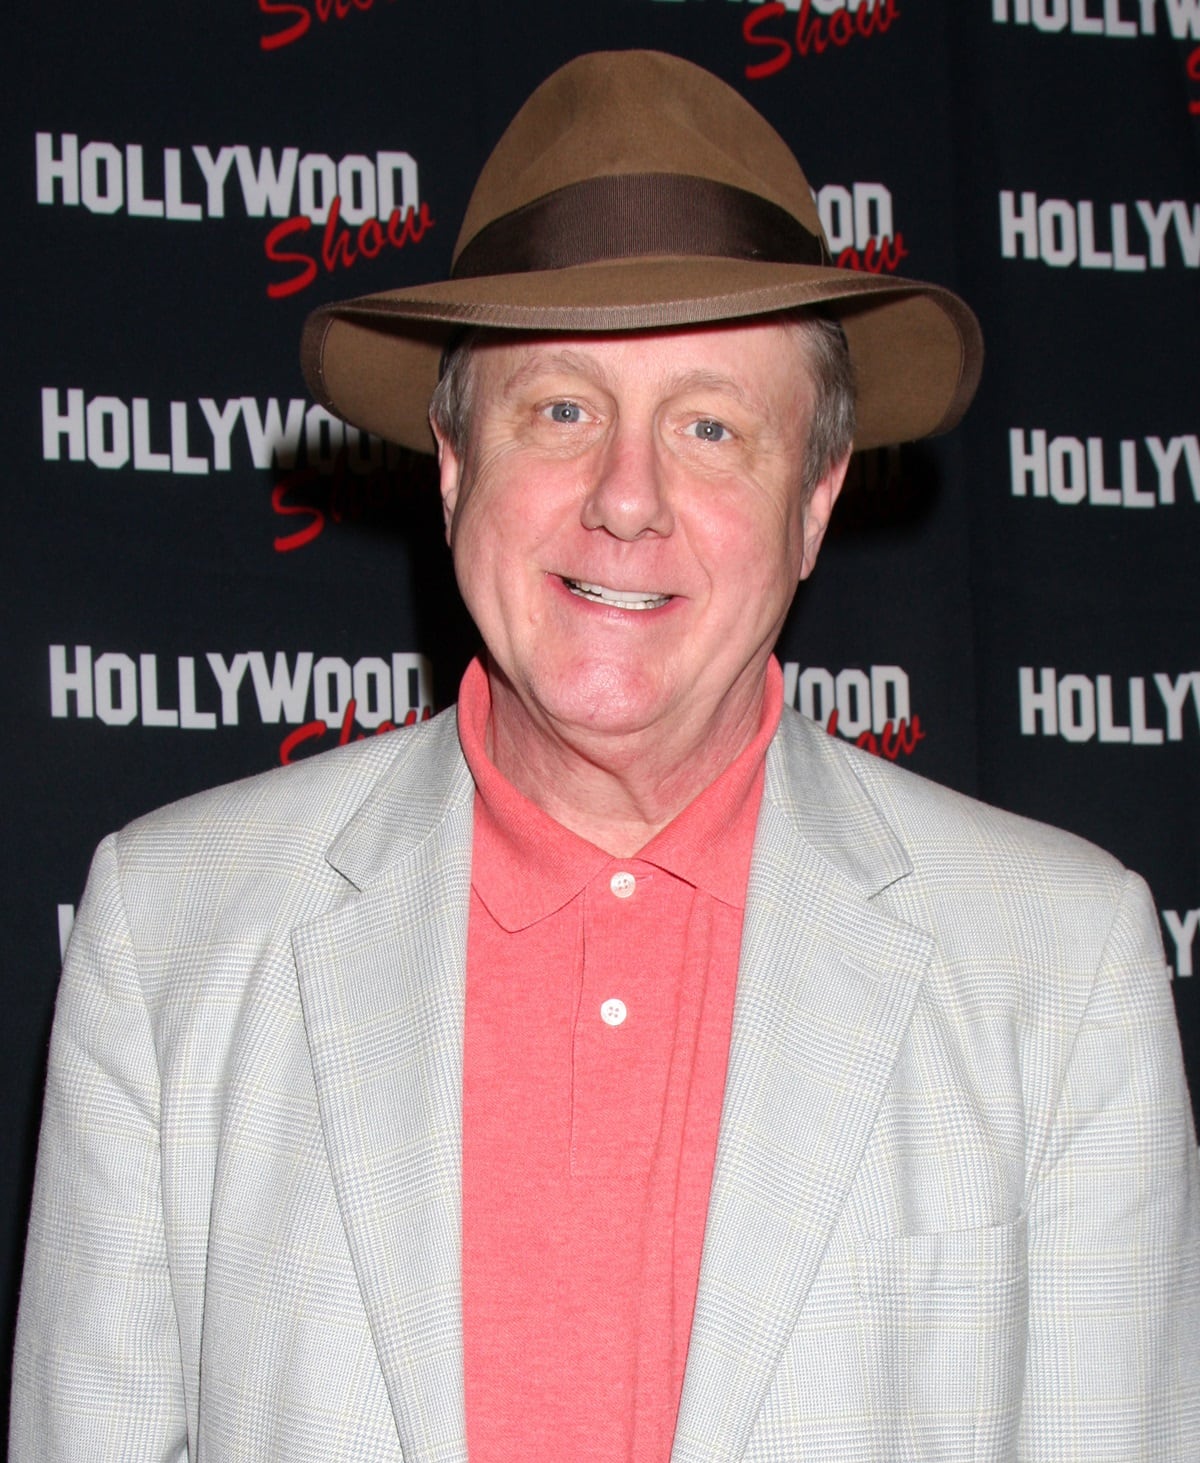 Harry Anderson, best known for his role as Judge Harry Stone in the hit NBC comedy series "Night Court," died at the age of 65 at his home in Asheville, North Carolina, on April 16, 2018